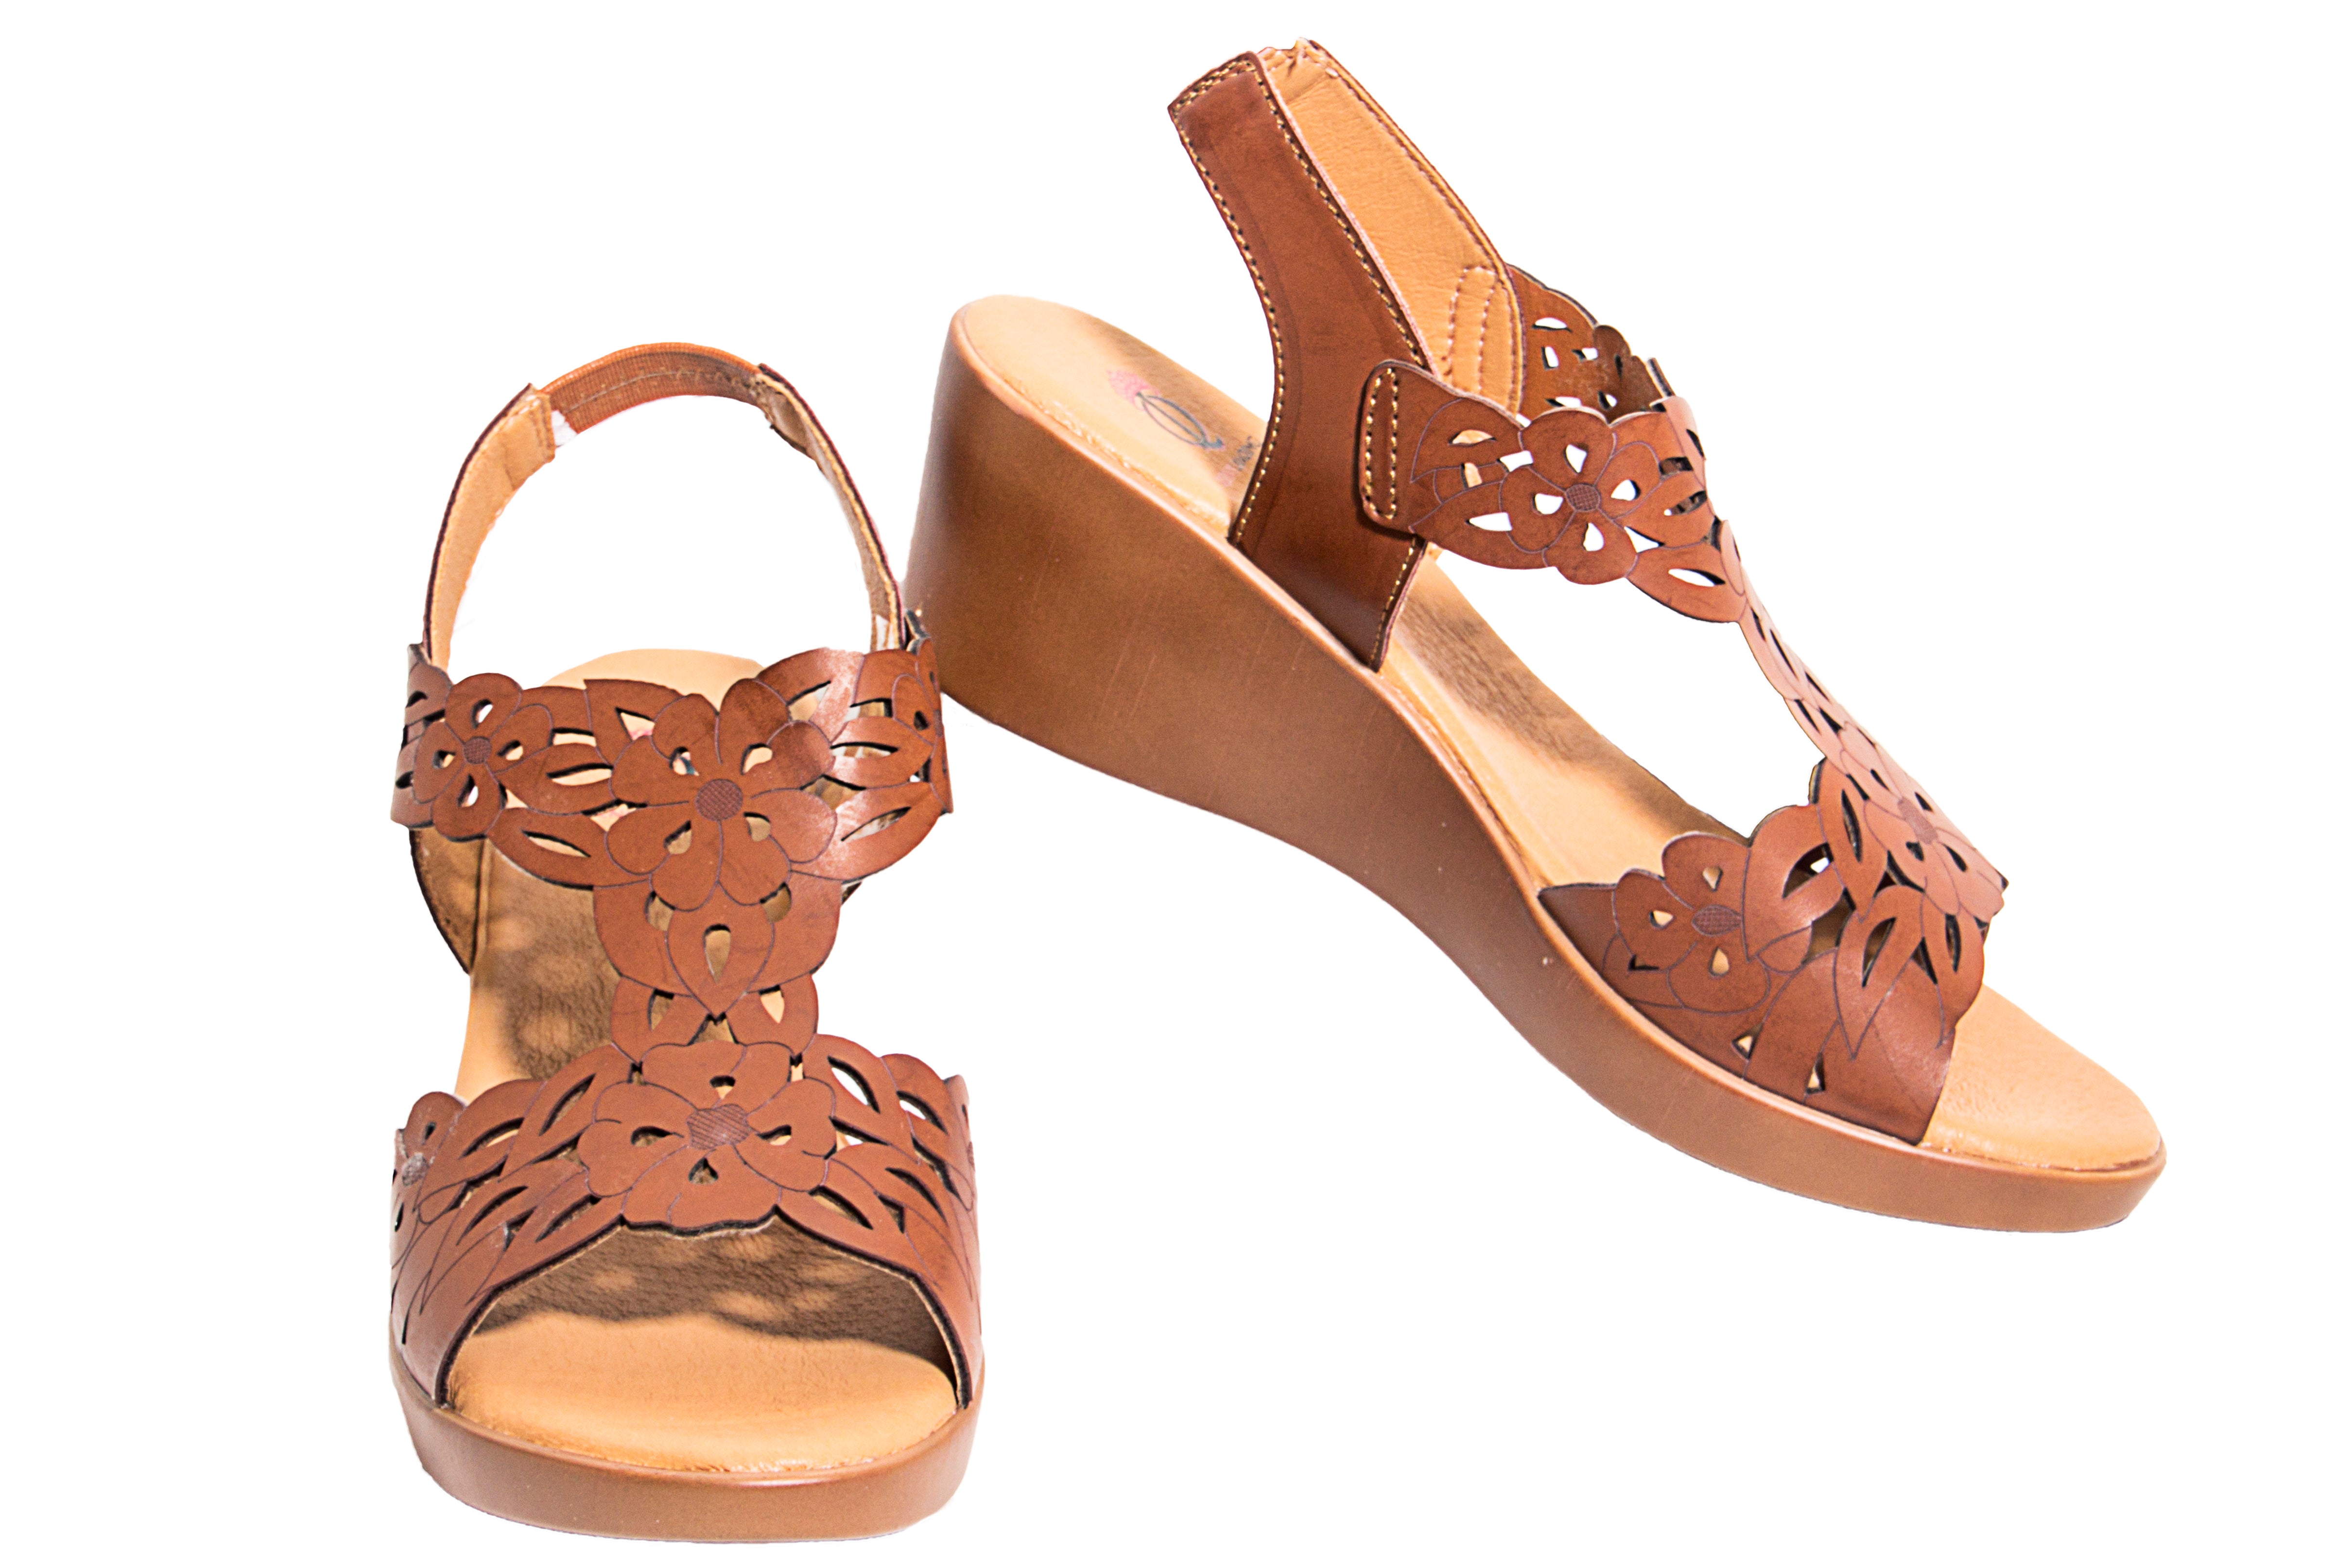 The georgous brown synthetic leather summer wedge sandal shoes with flower cut out